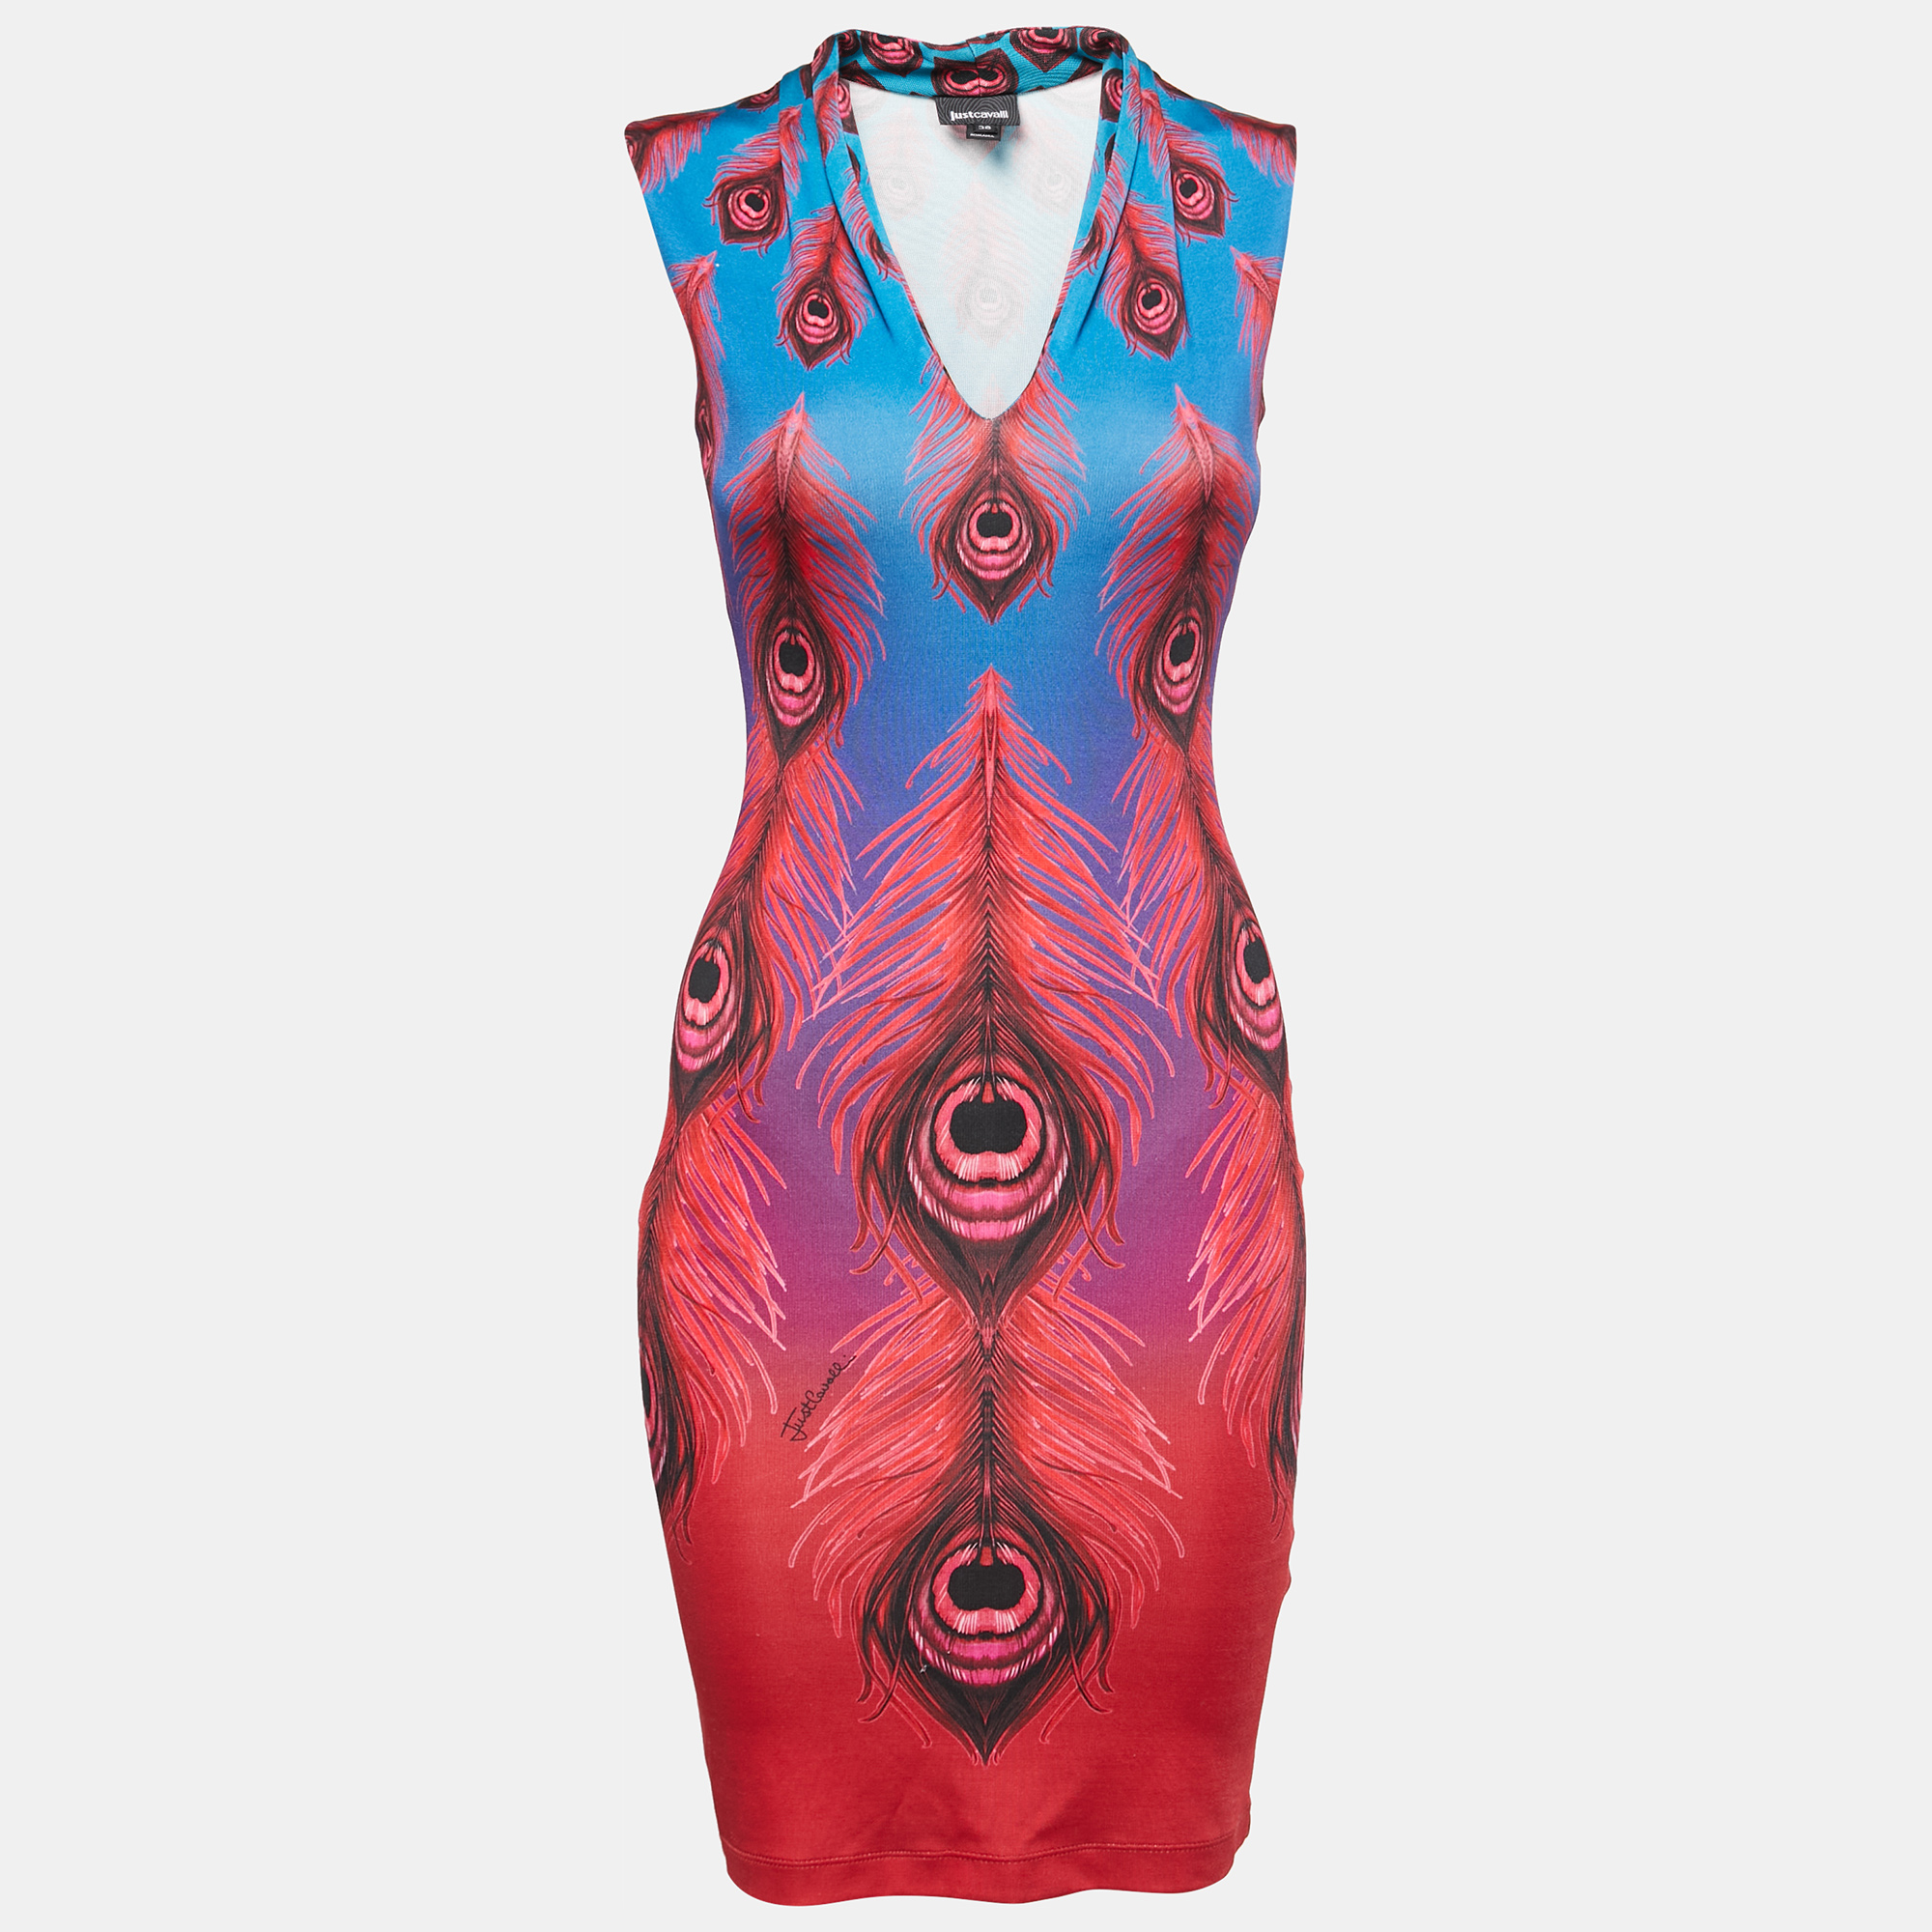 Just Cavalli Blue/Red Peacock Feather Printed Jersey Bodycon Dress S